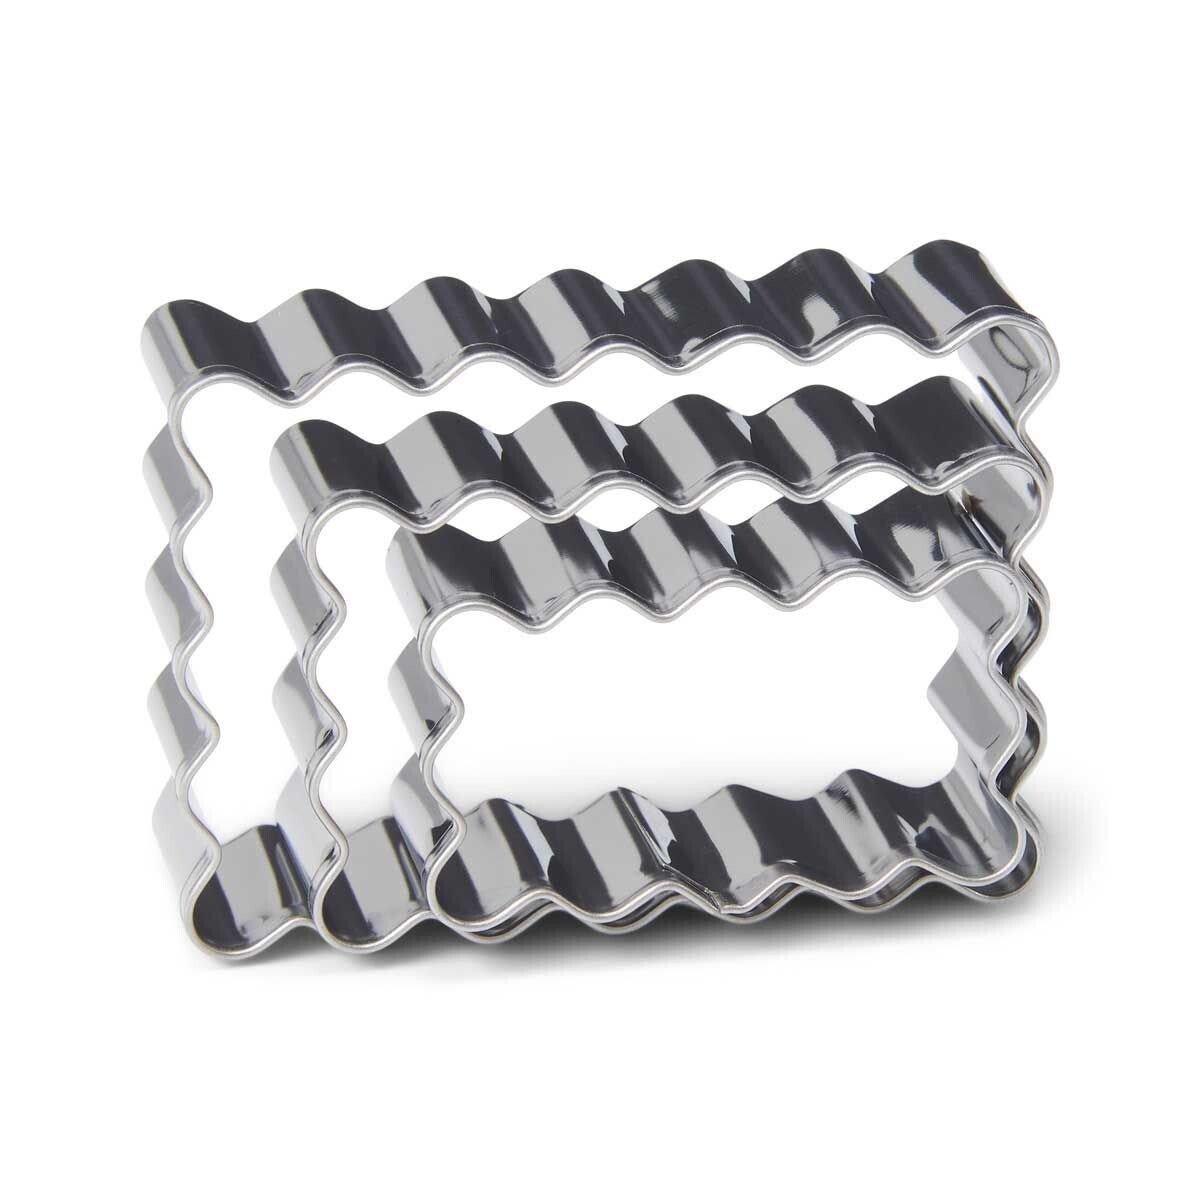 Patisse Cookie Cutters -FLUTED RECTANGLES - Σετ 3τεμ κουπ πατ κυματοειδή ορθογώνια